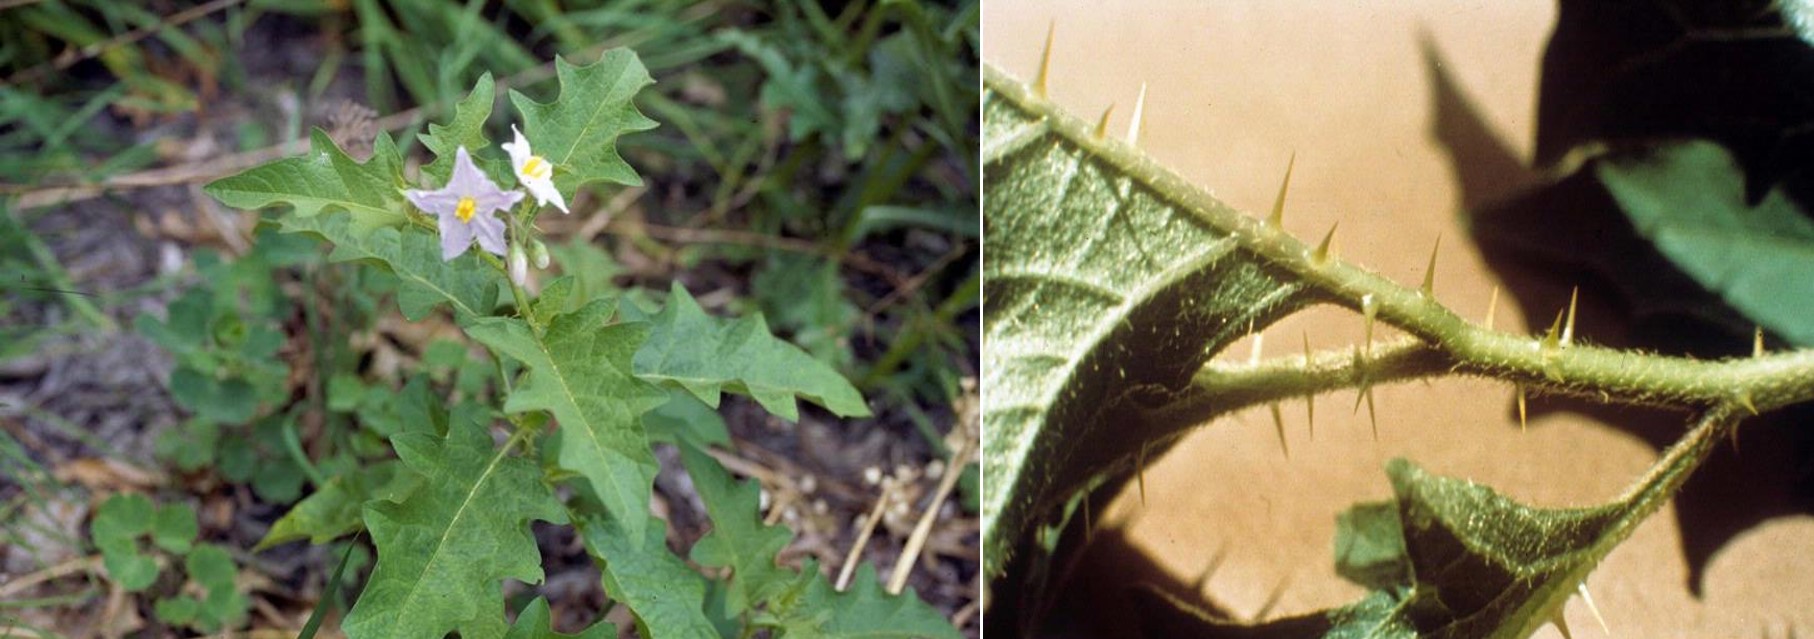 Horsenettle plant (left) and spines on petioles (right). 